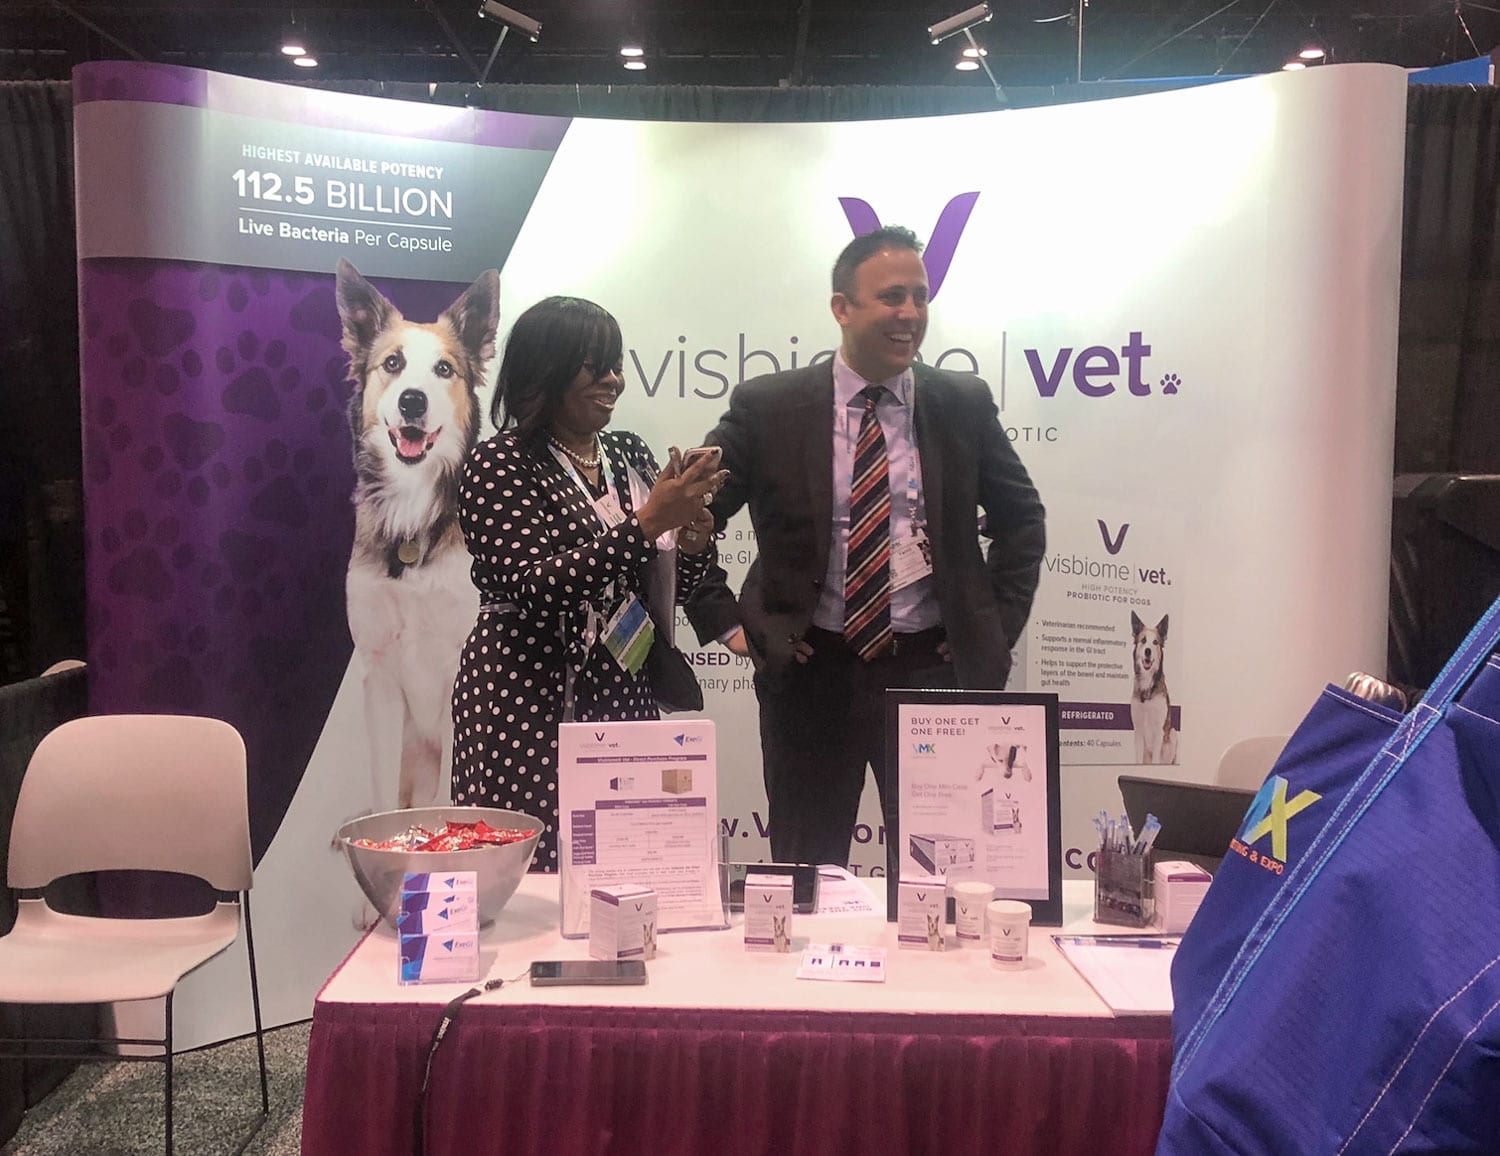 Booth for Visbiome Vet for High Potency Pet Probiotics with a woman and a man interacting with the public with promotion materials